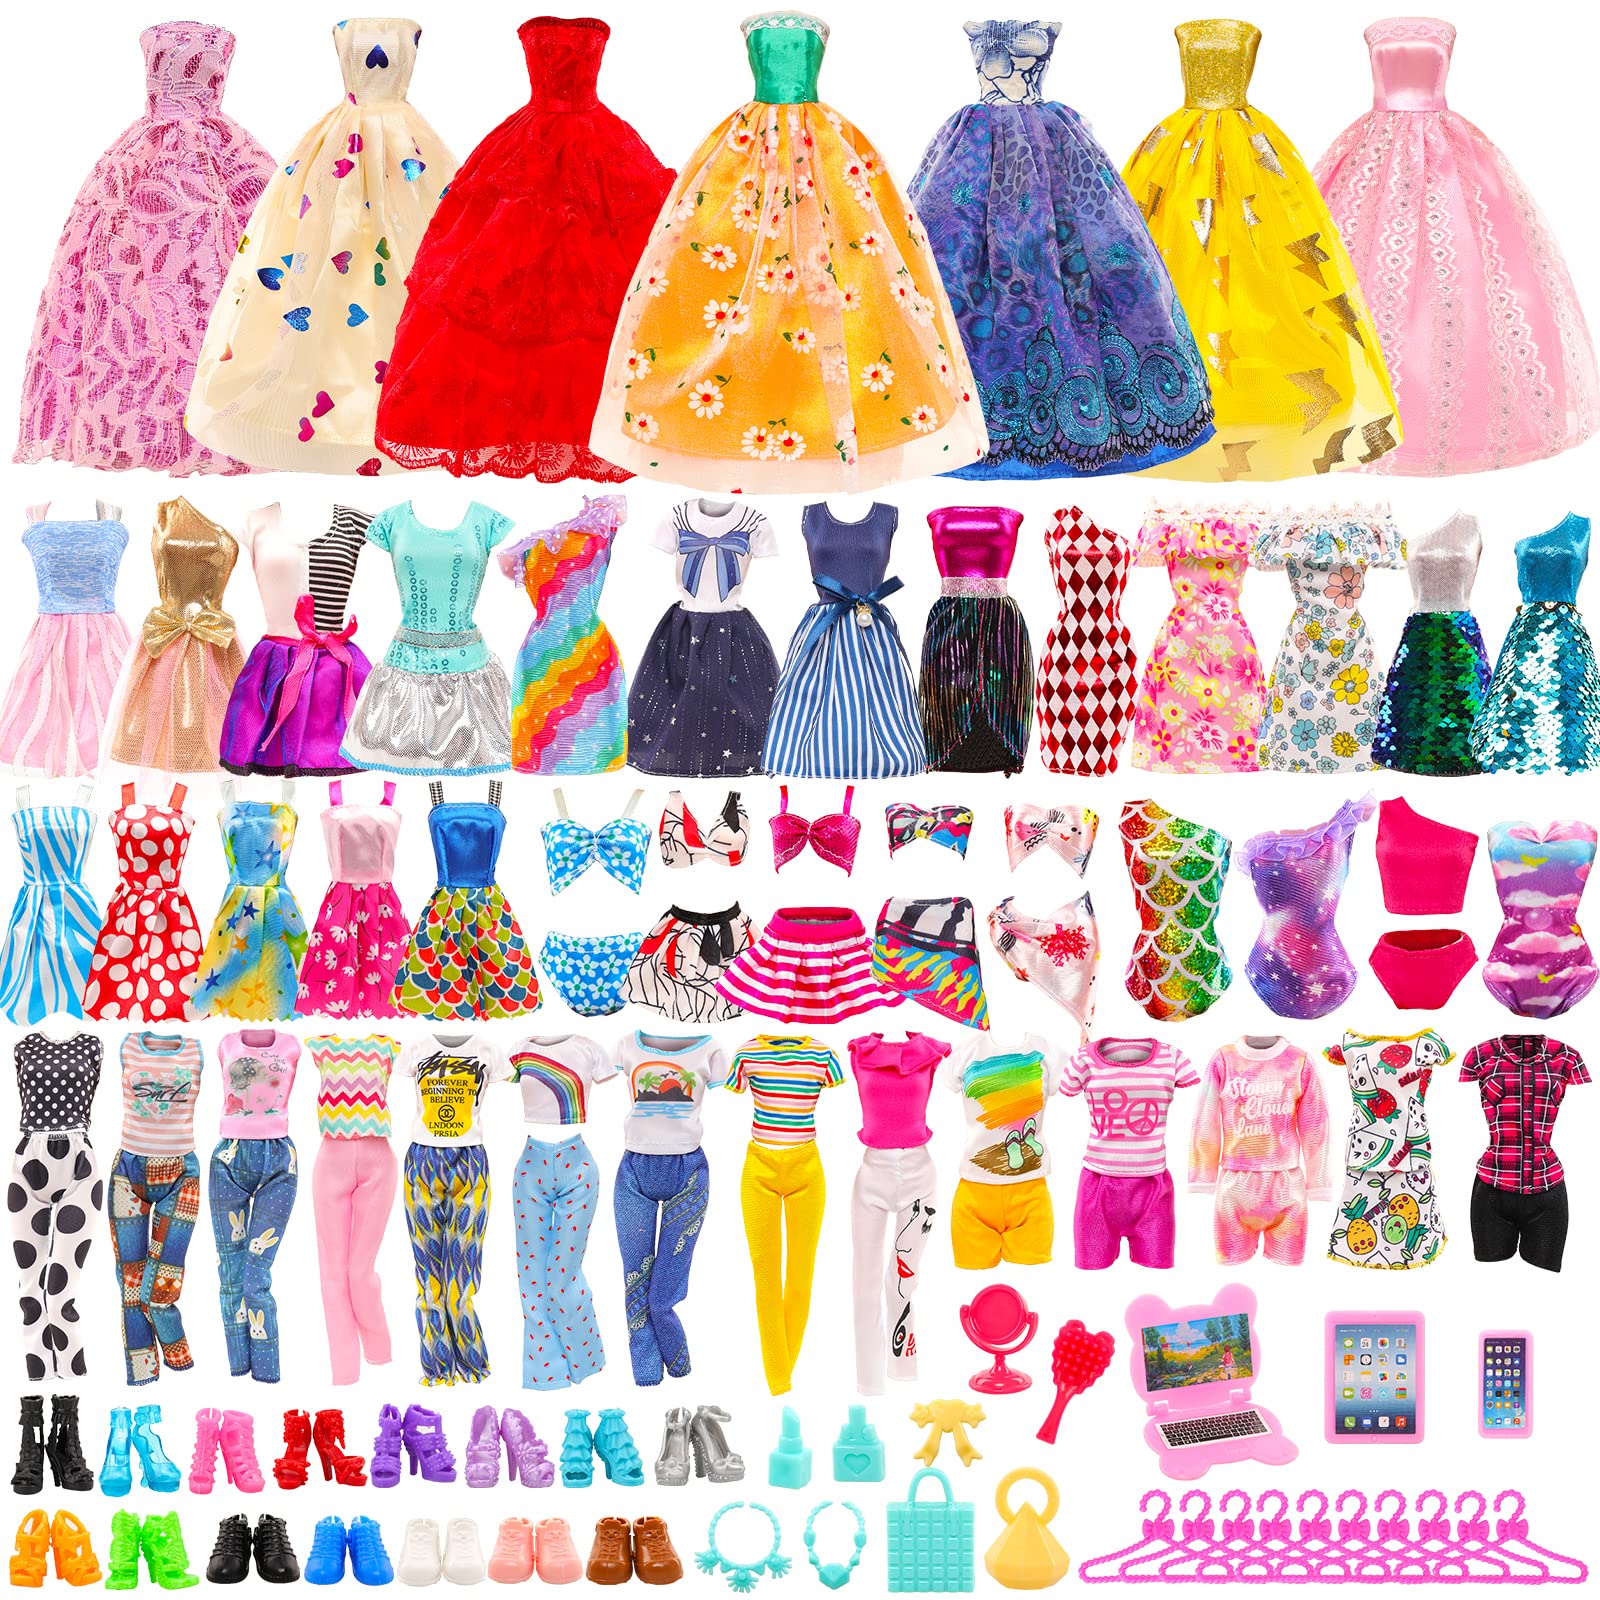 Paper Doll Dress Tutorial – Graphic 45 Papers